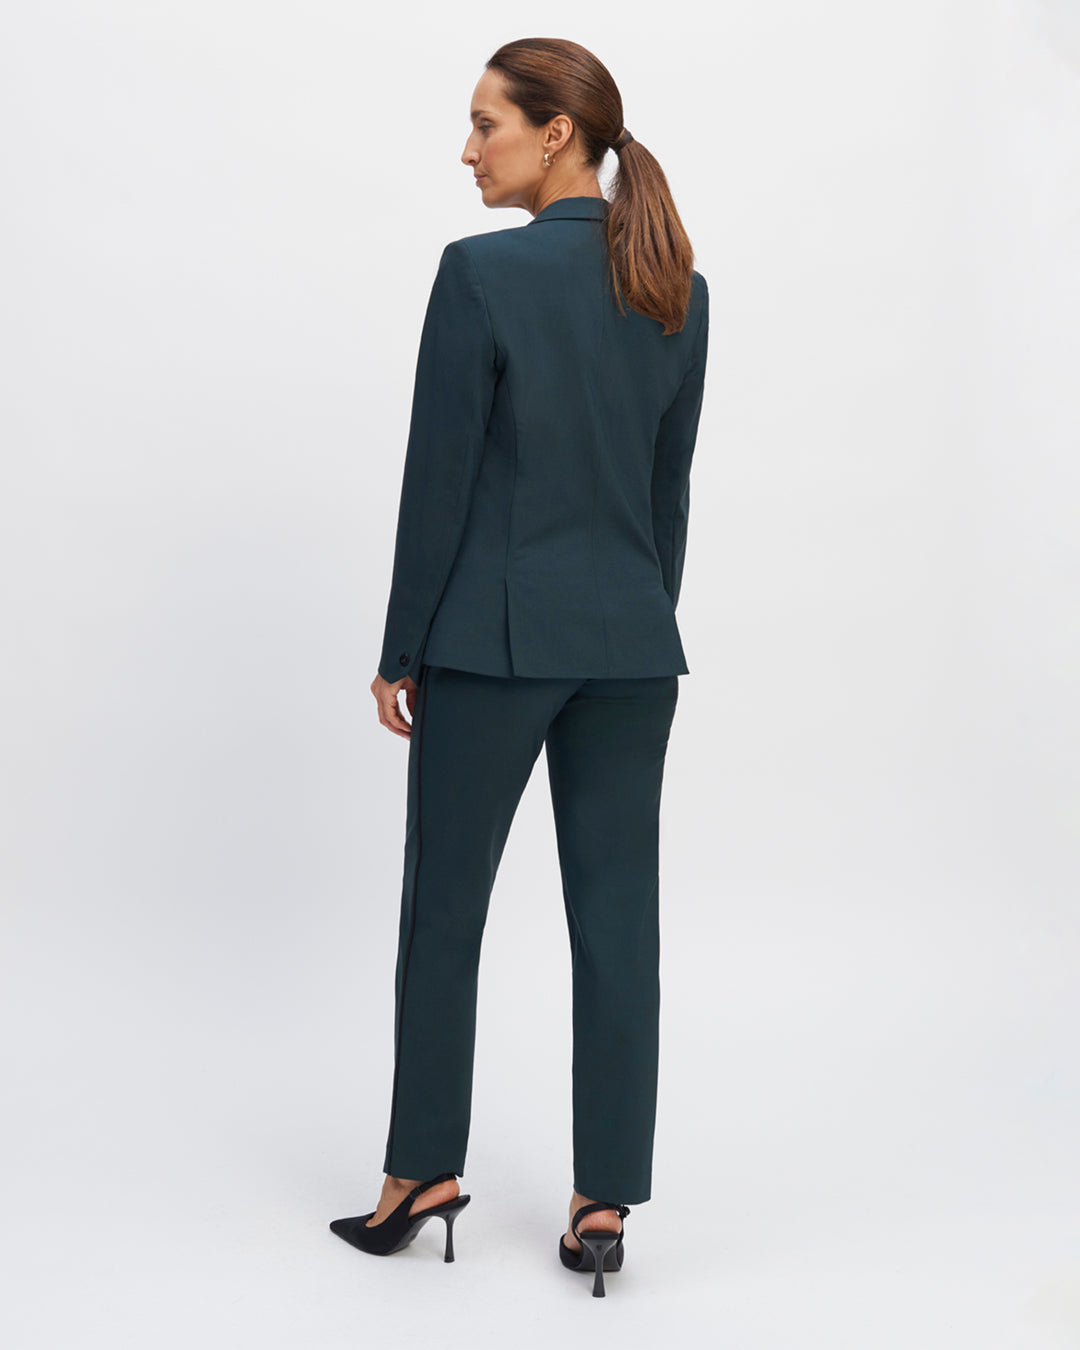 "Trouser-tailor-green-Cigarette-cut-Mid-rise-waist-Faux-cavalier-pockets-in-the-front-Pockets-peeled-behind-Passing-for-the-belt-17H10-tailleurs-for-women-paris-"